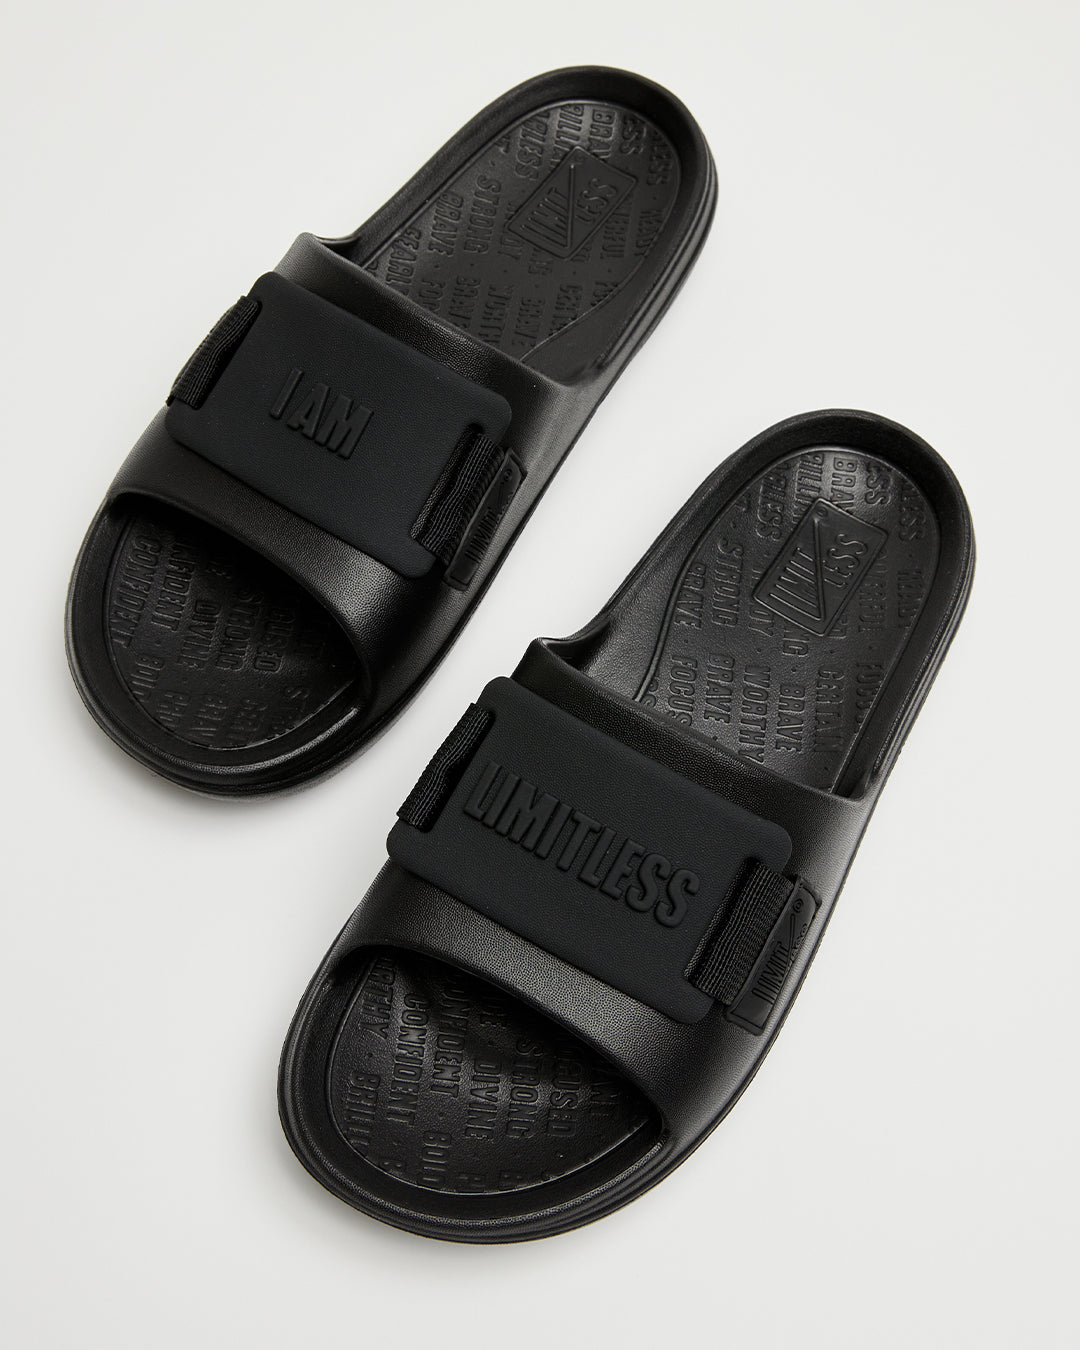 LIMITLESS SLIDES™ WITH ESSENTIAL TIBAH™ QUAD - INDEPENDENCE HIGH SCHOOL EDITION